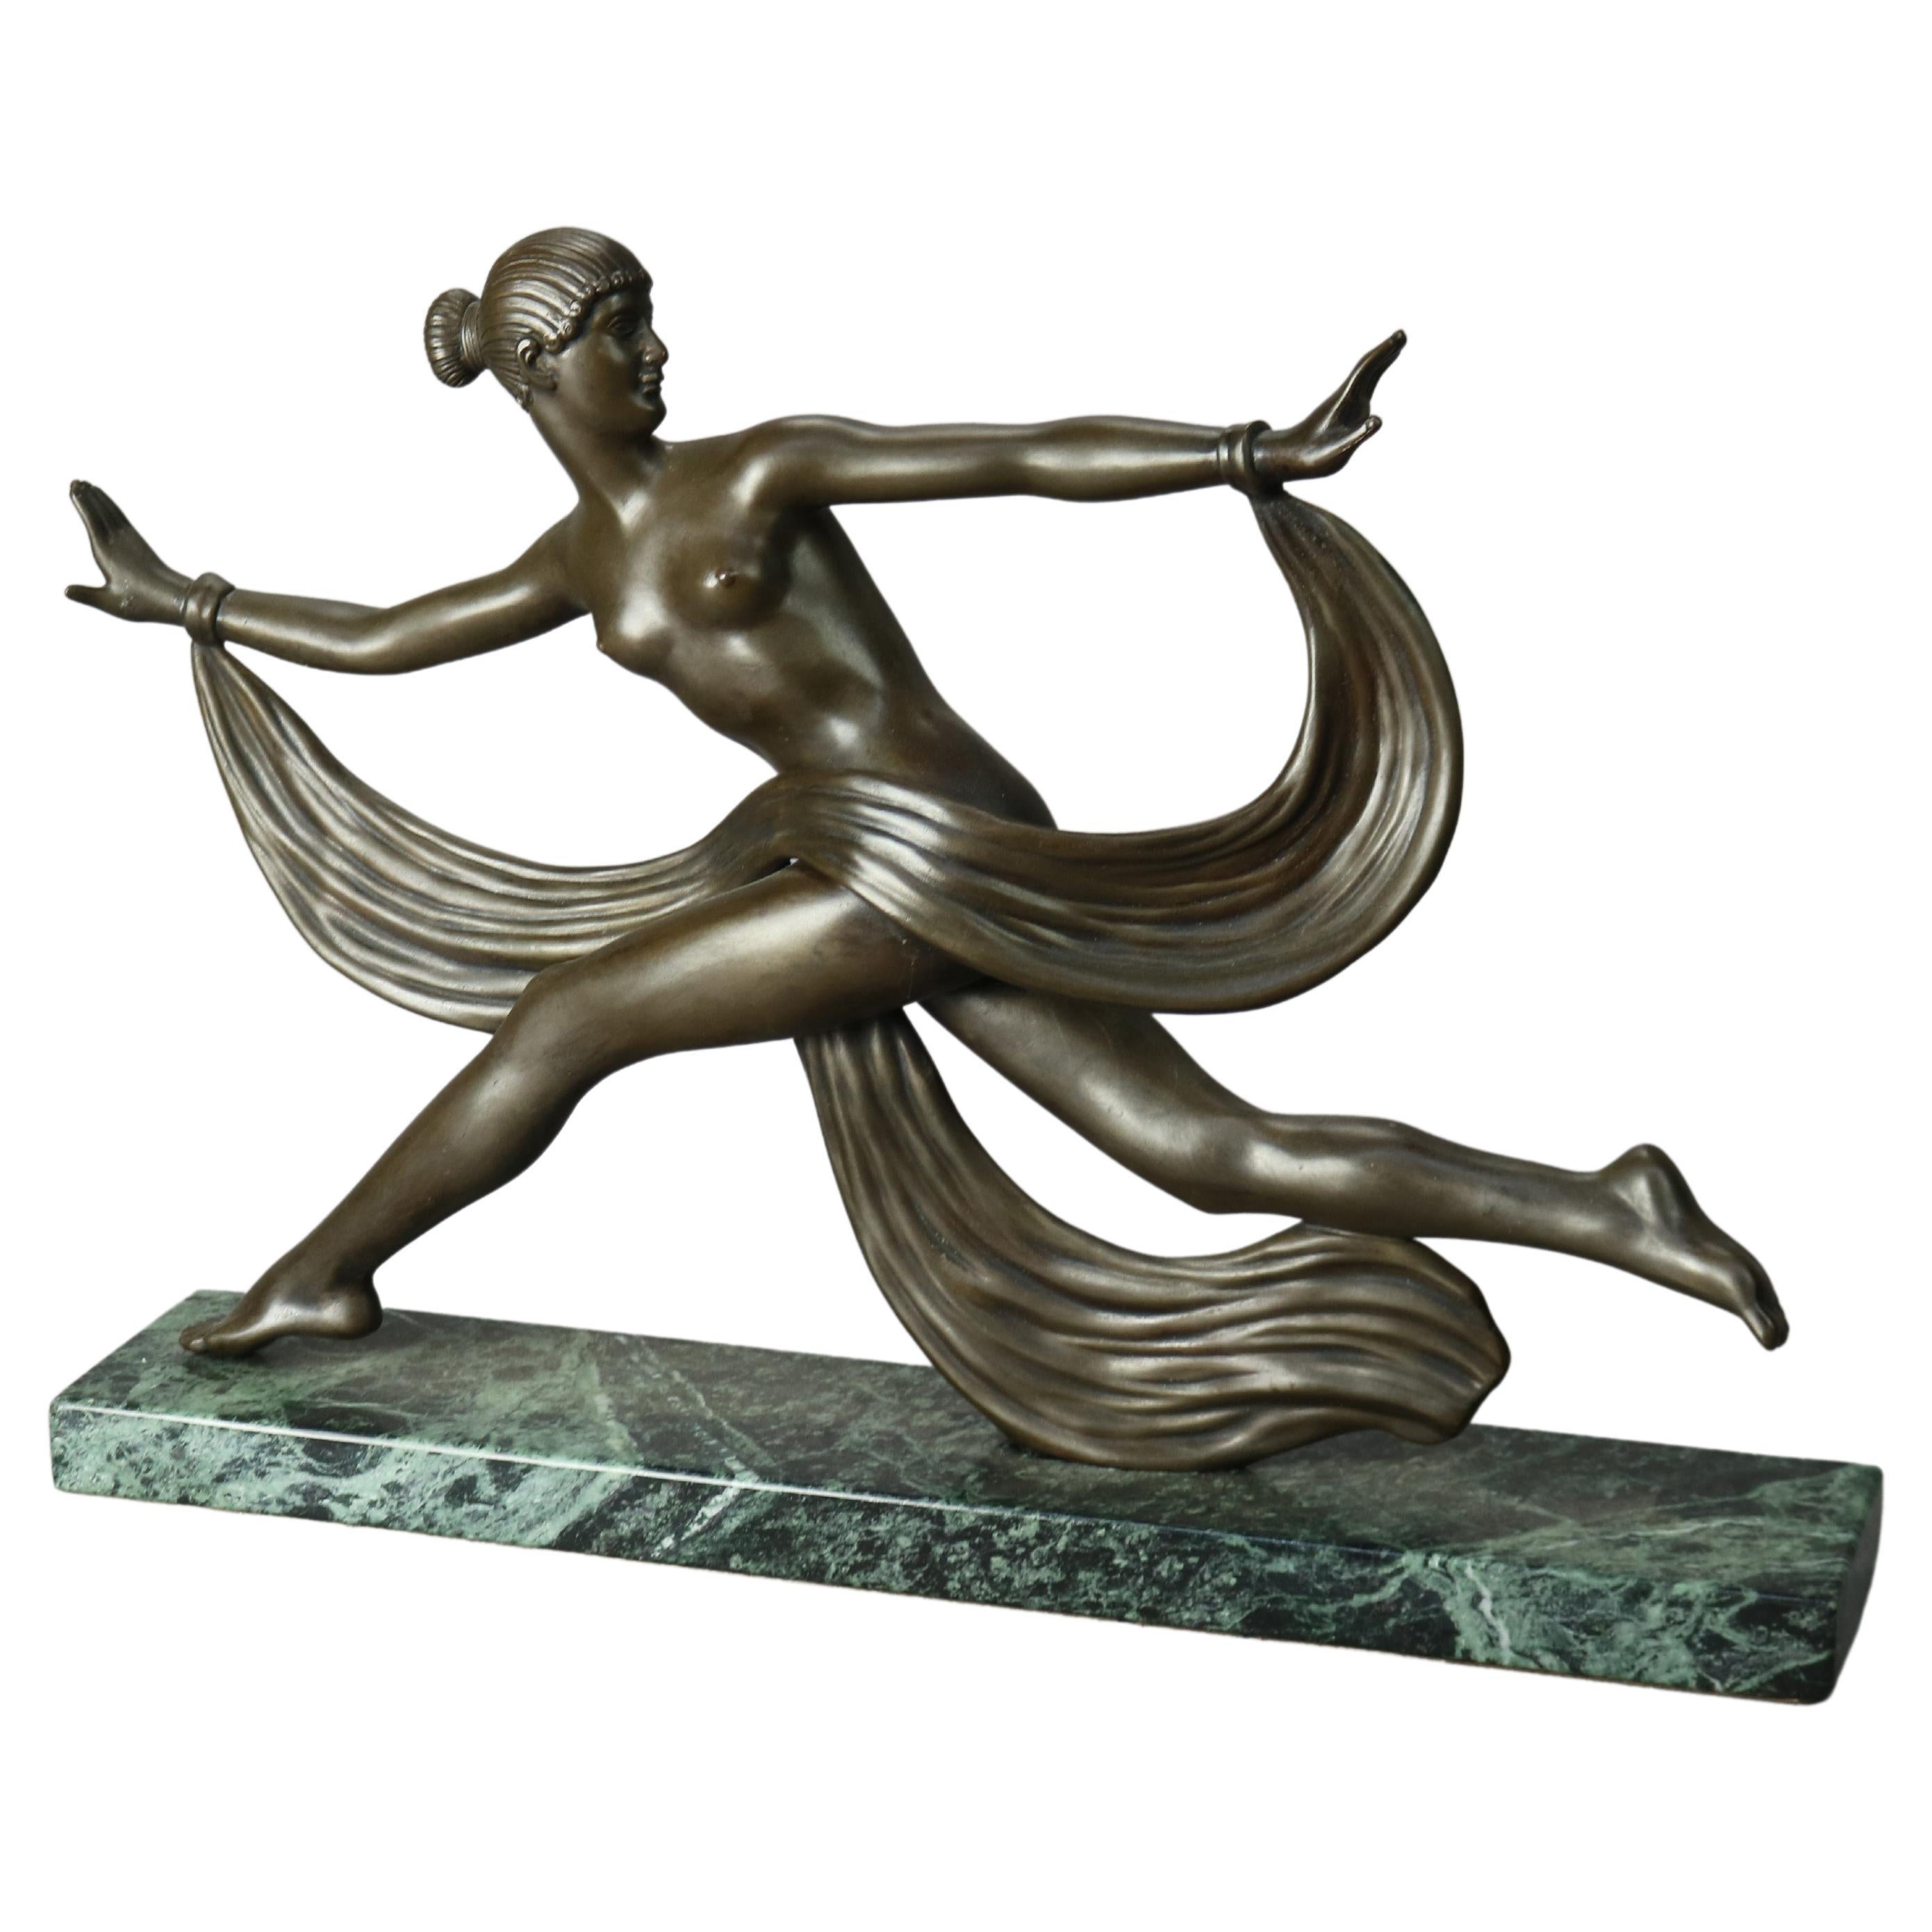 Antique French Art Deco Sculpture Statue of a Woman On Marble Plinth, 20th C. For Sale